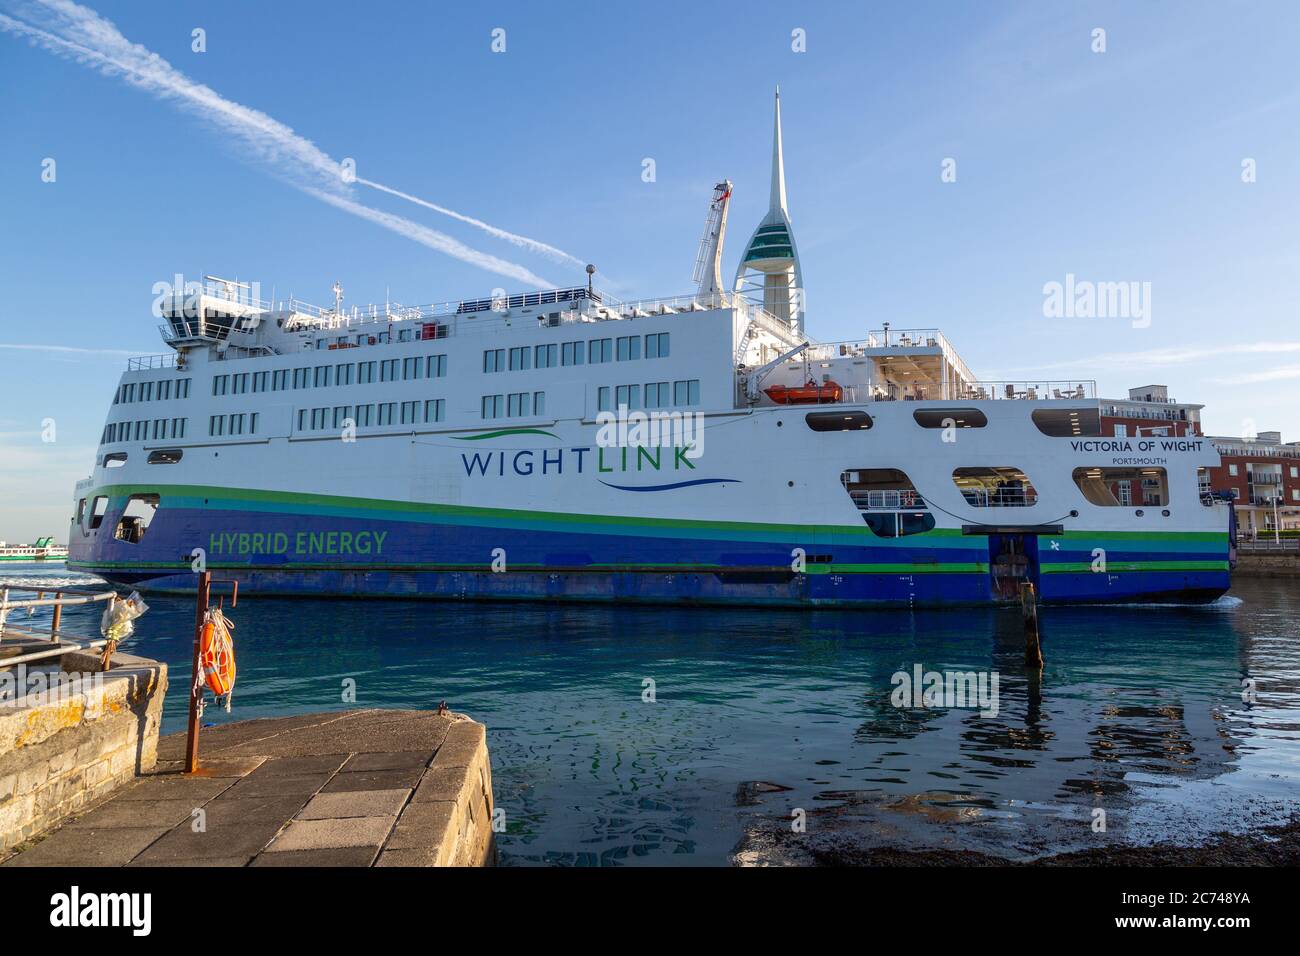 The Wightlink ferry Victoria of whight sailing past the spinnaker tower from old Portsmouth Stock Photo